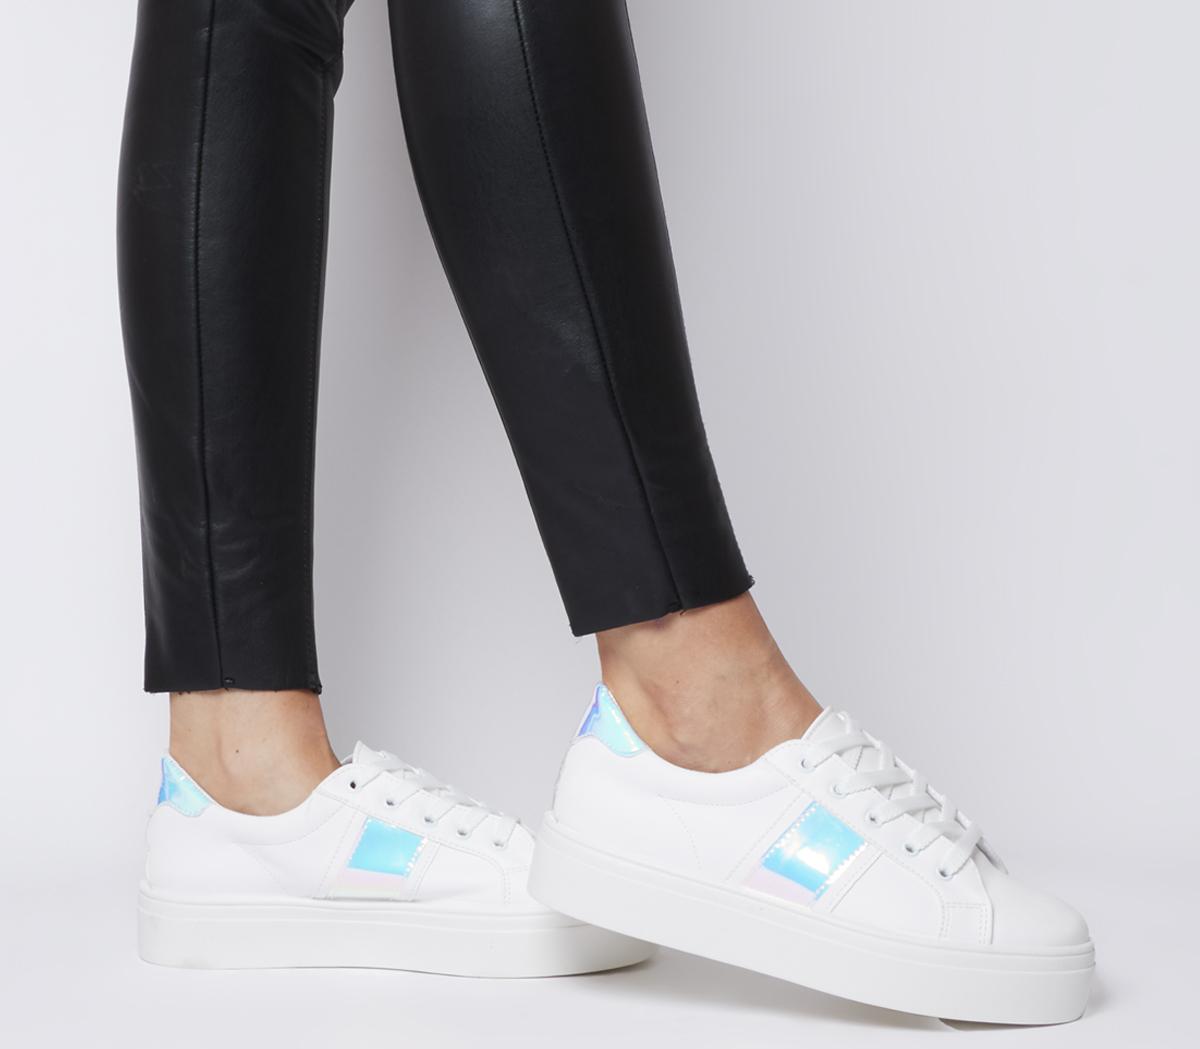 Feature Platform Lace Up Trainers White 